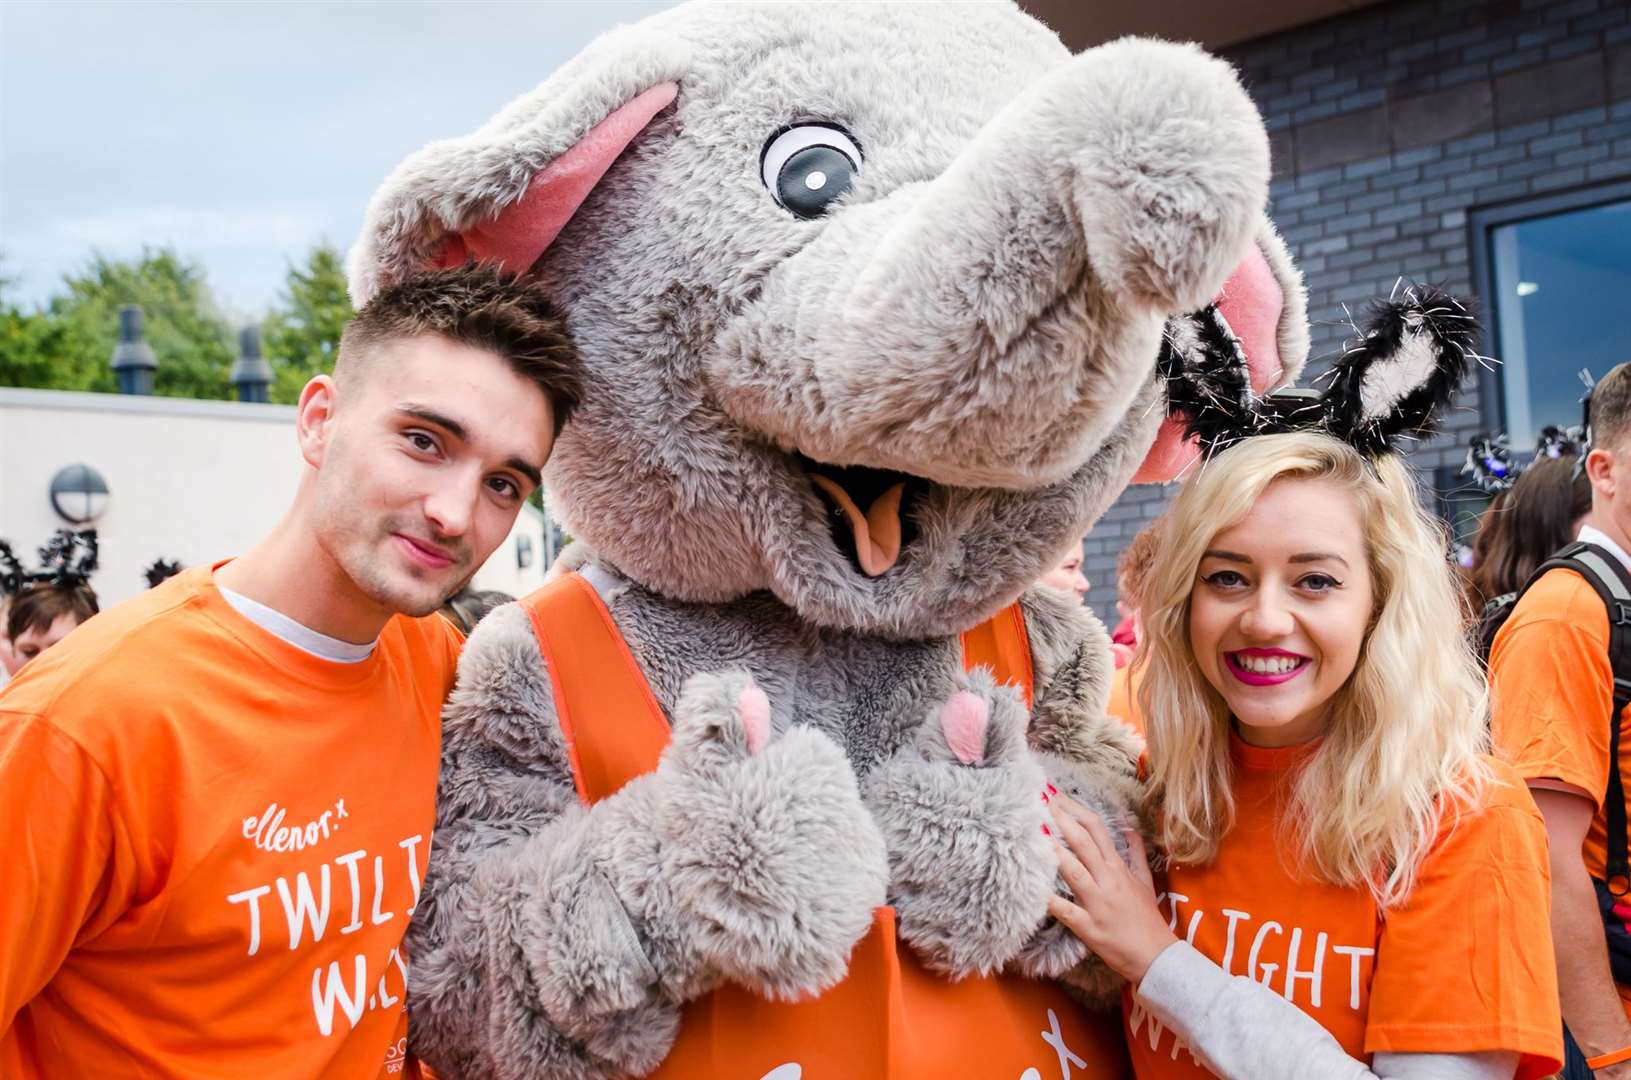 Tom and his wife Kelsey Hardwick previously took part in a twilight walk supporting the Gravesend charity